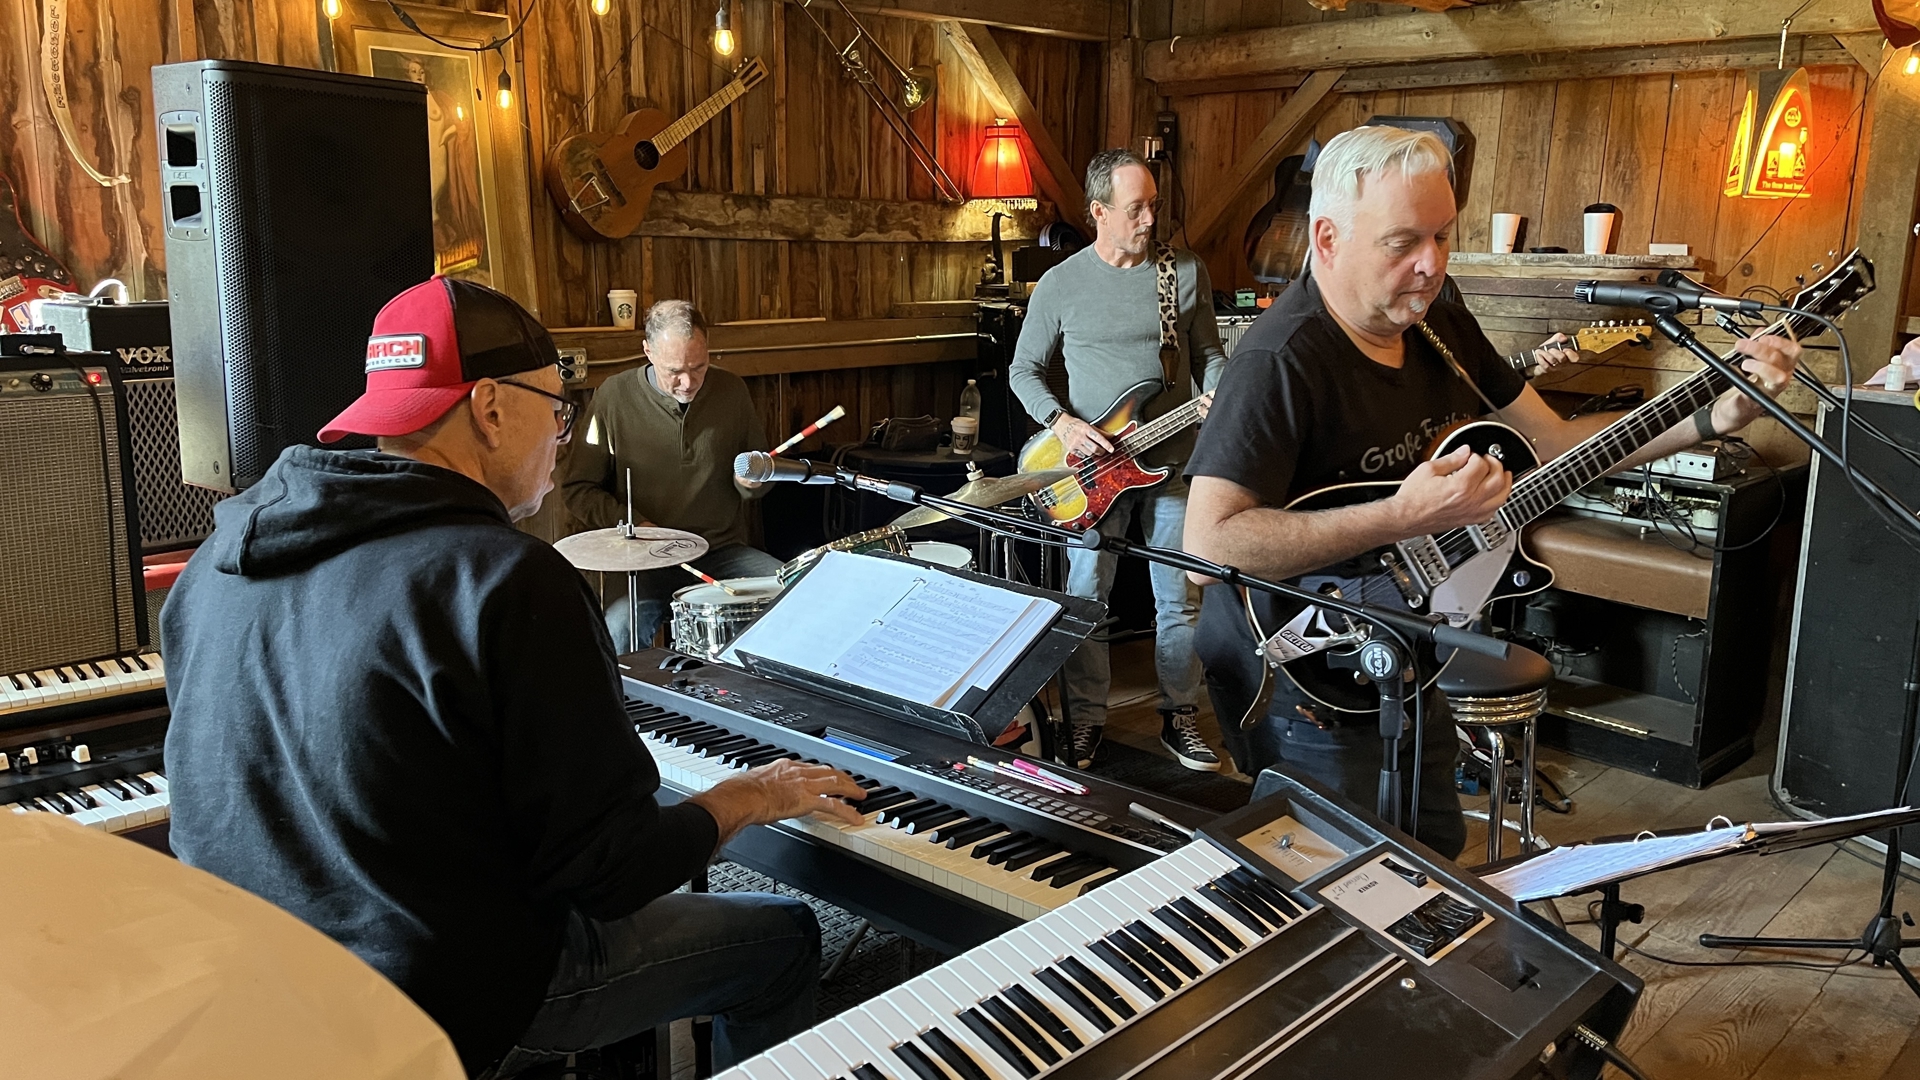 The popular Toledo-based band from the '80s has come back home to perform a tribute concert Friday for former bassist EJ Wells, raising funds for arts scholarship.